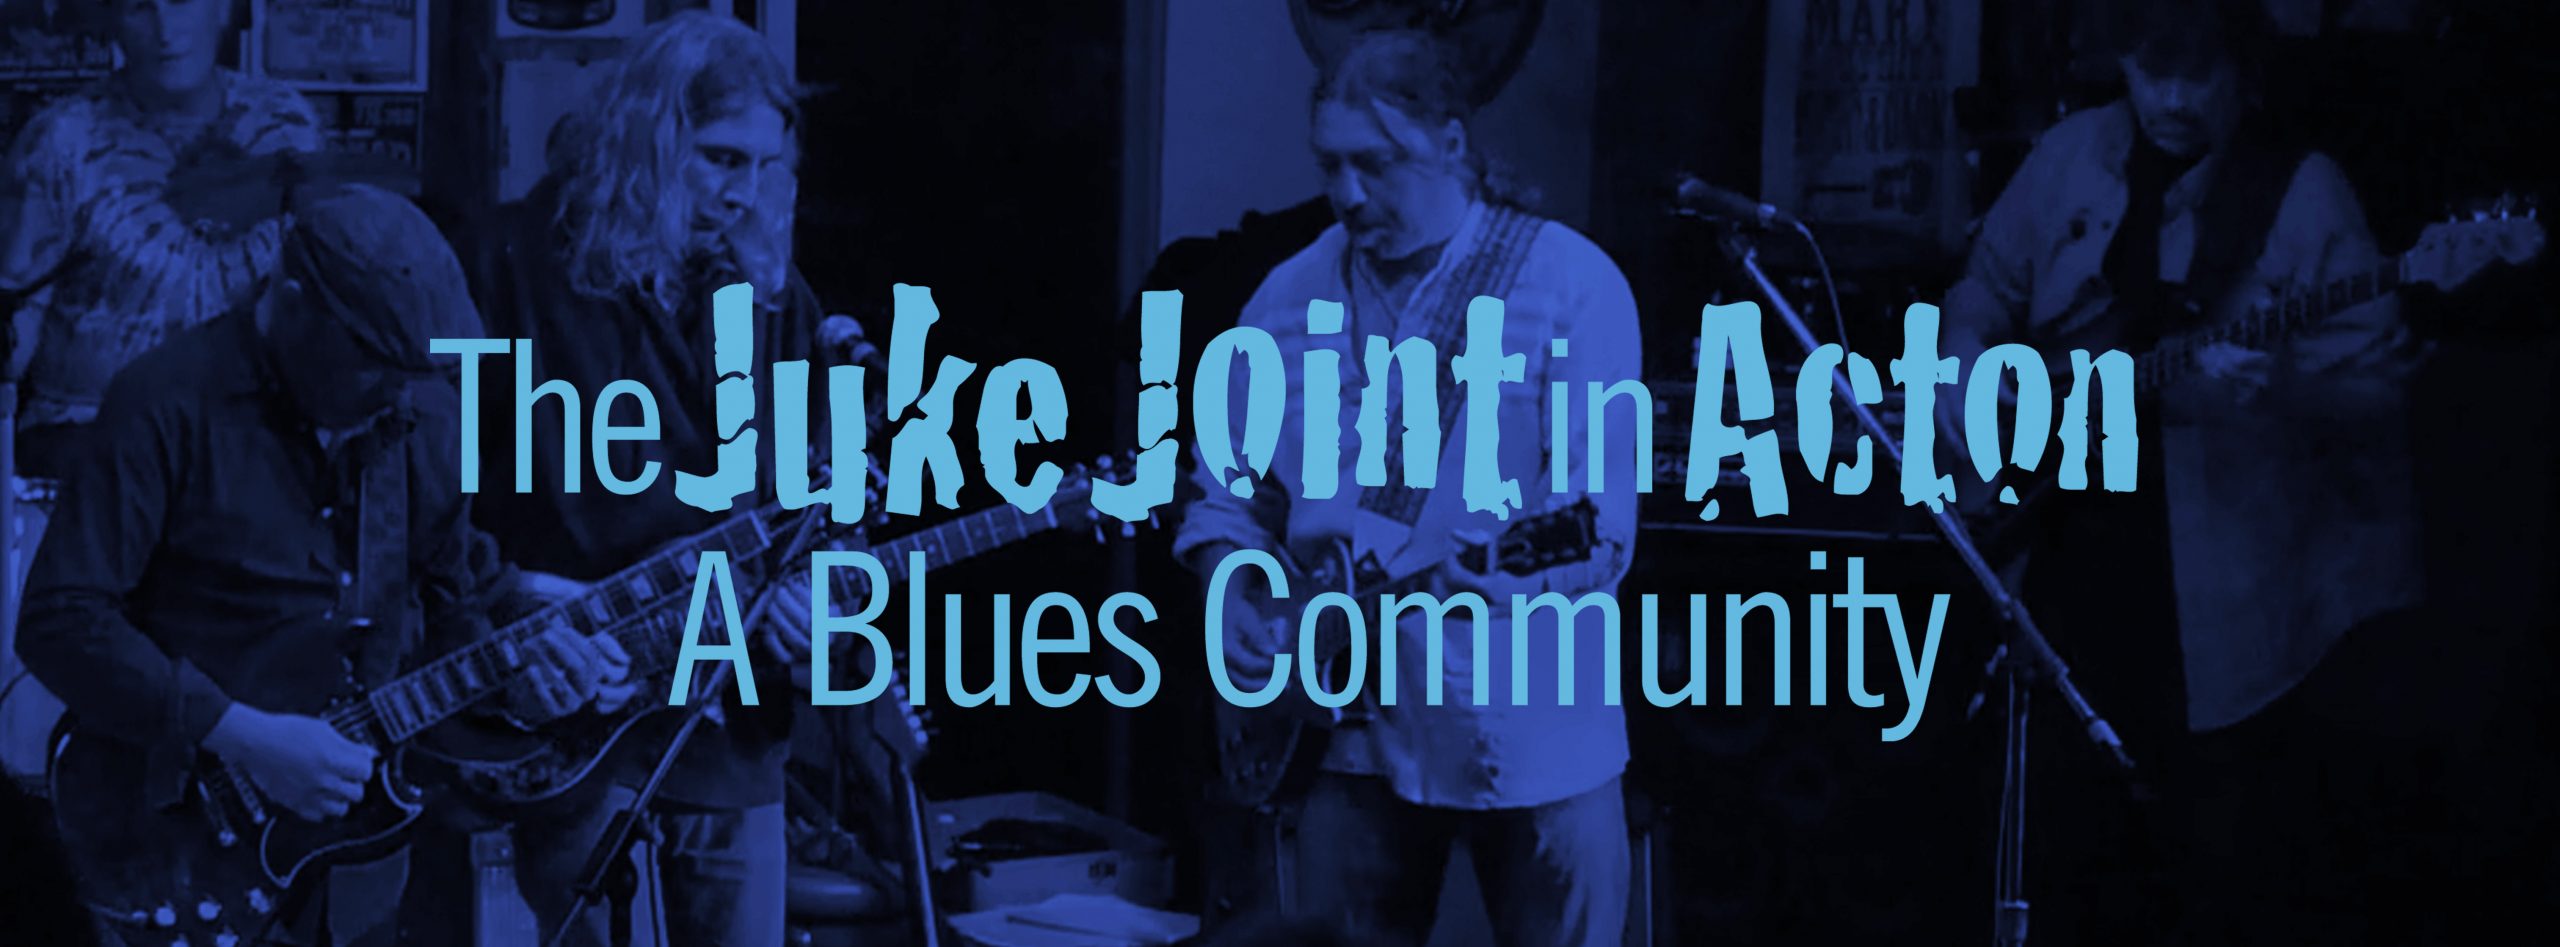 The Juke Joint Action A Blues Community Movie